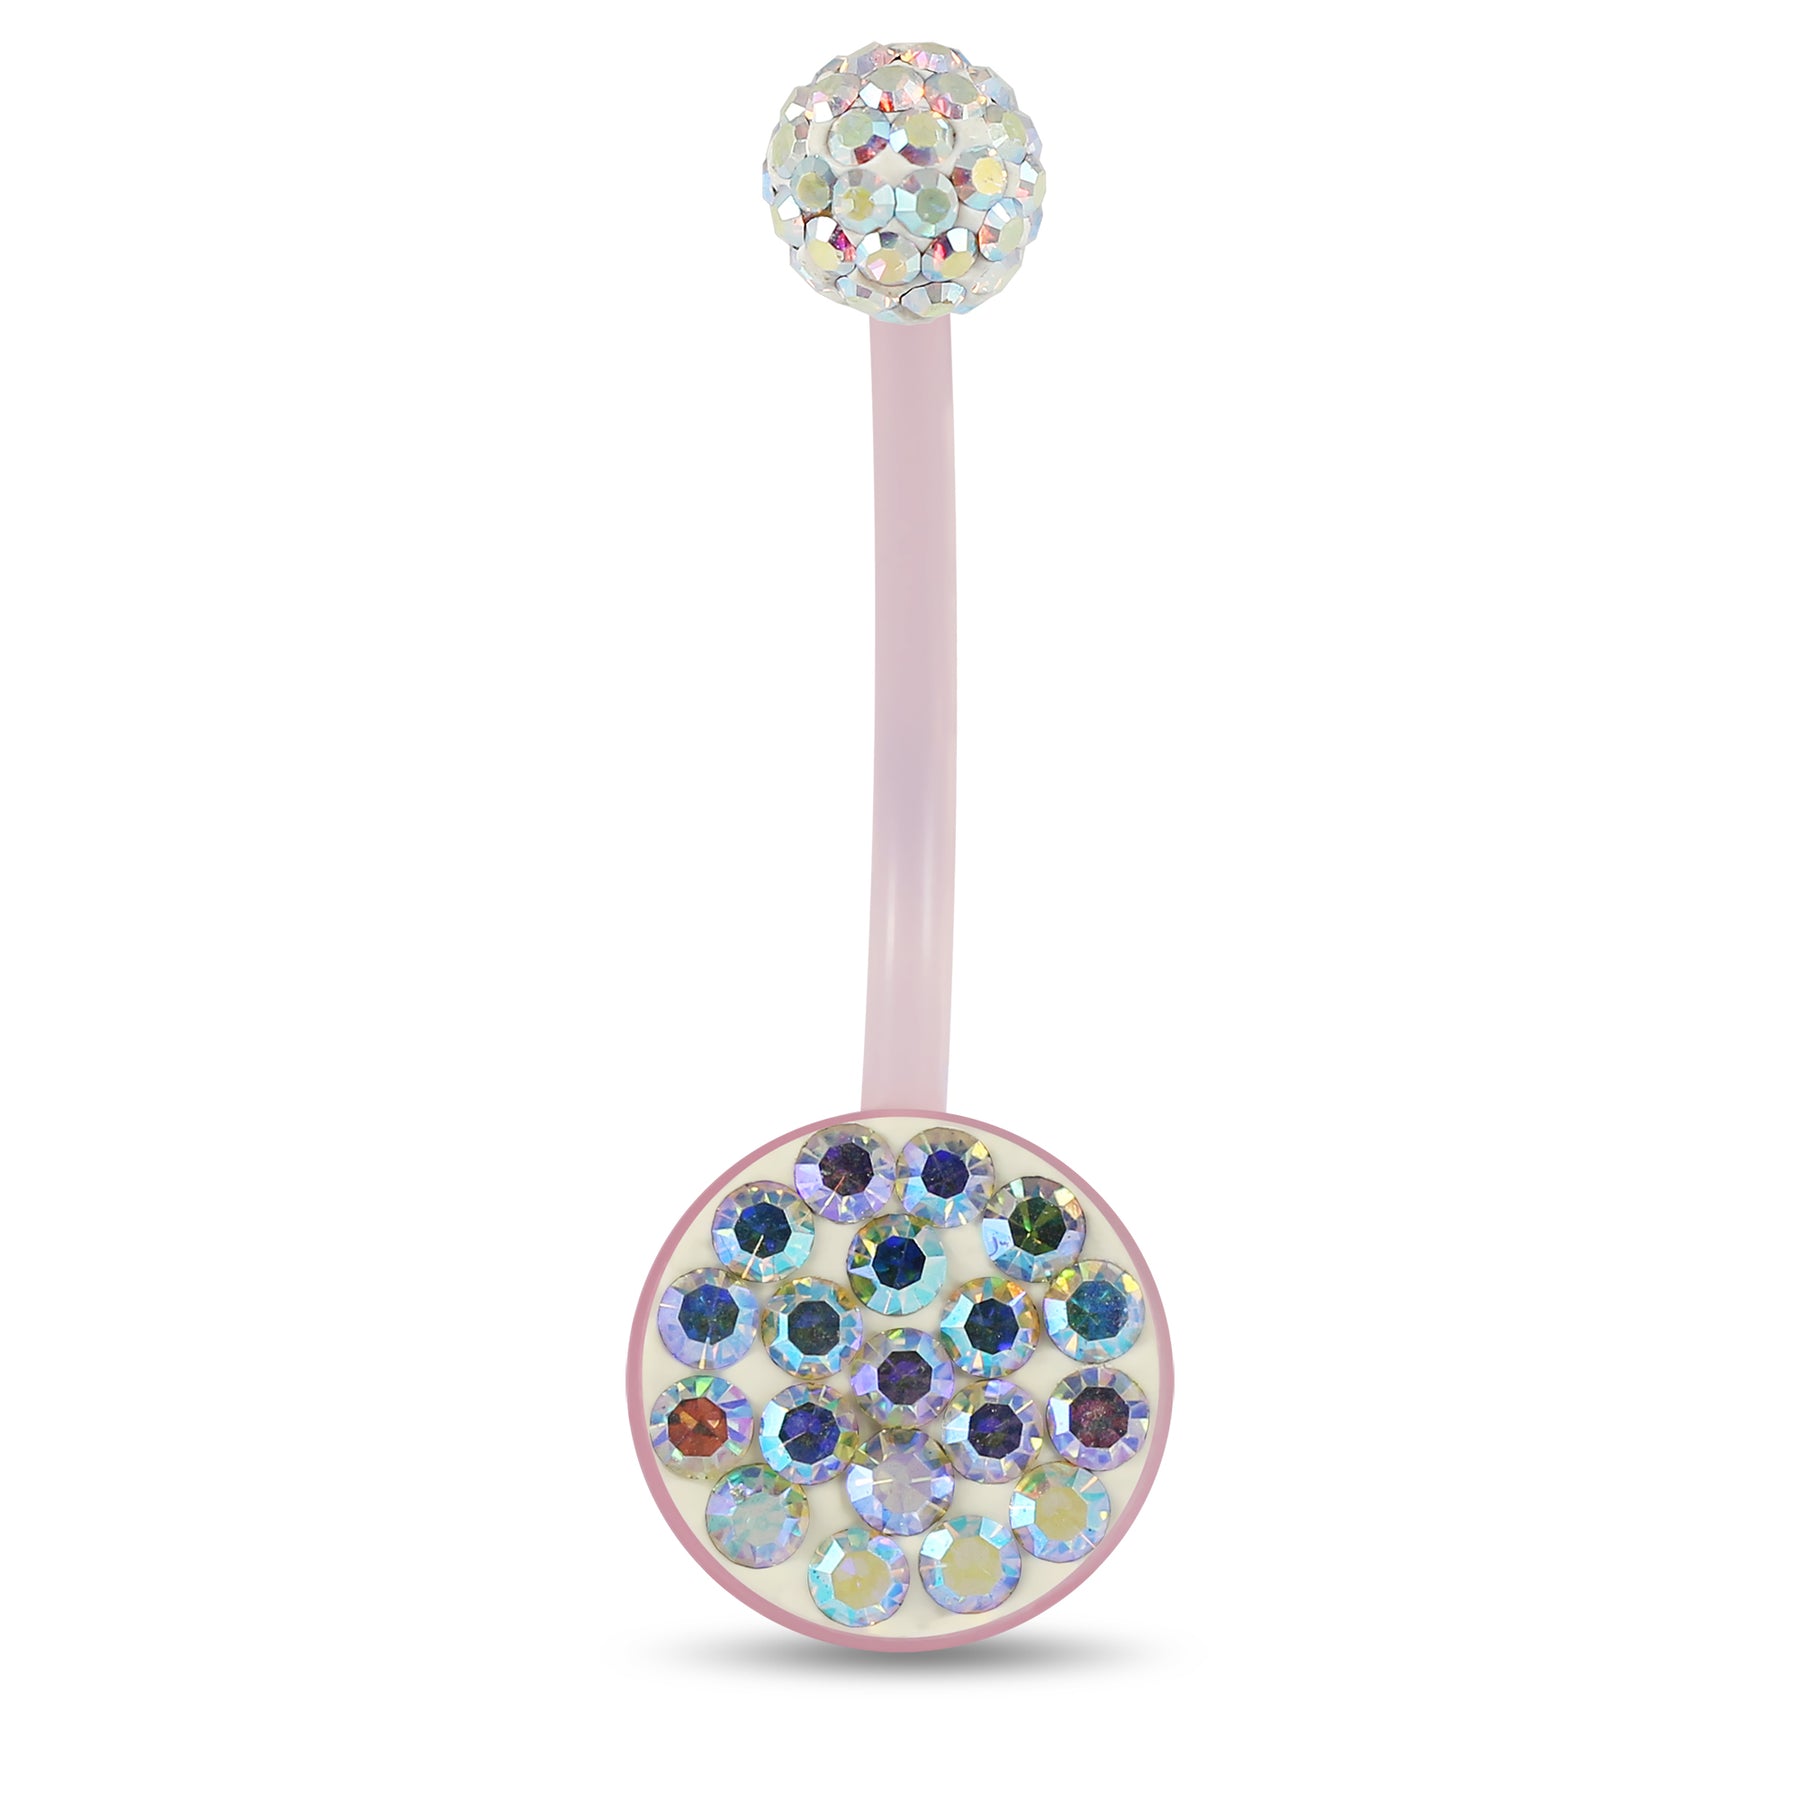 10mm Pink Base BioFlex with Crystal Ferido Top Ball  pregnancy Belly Ring